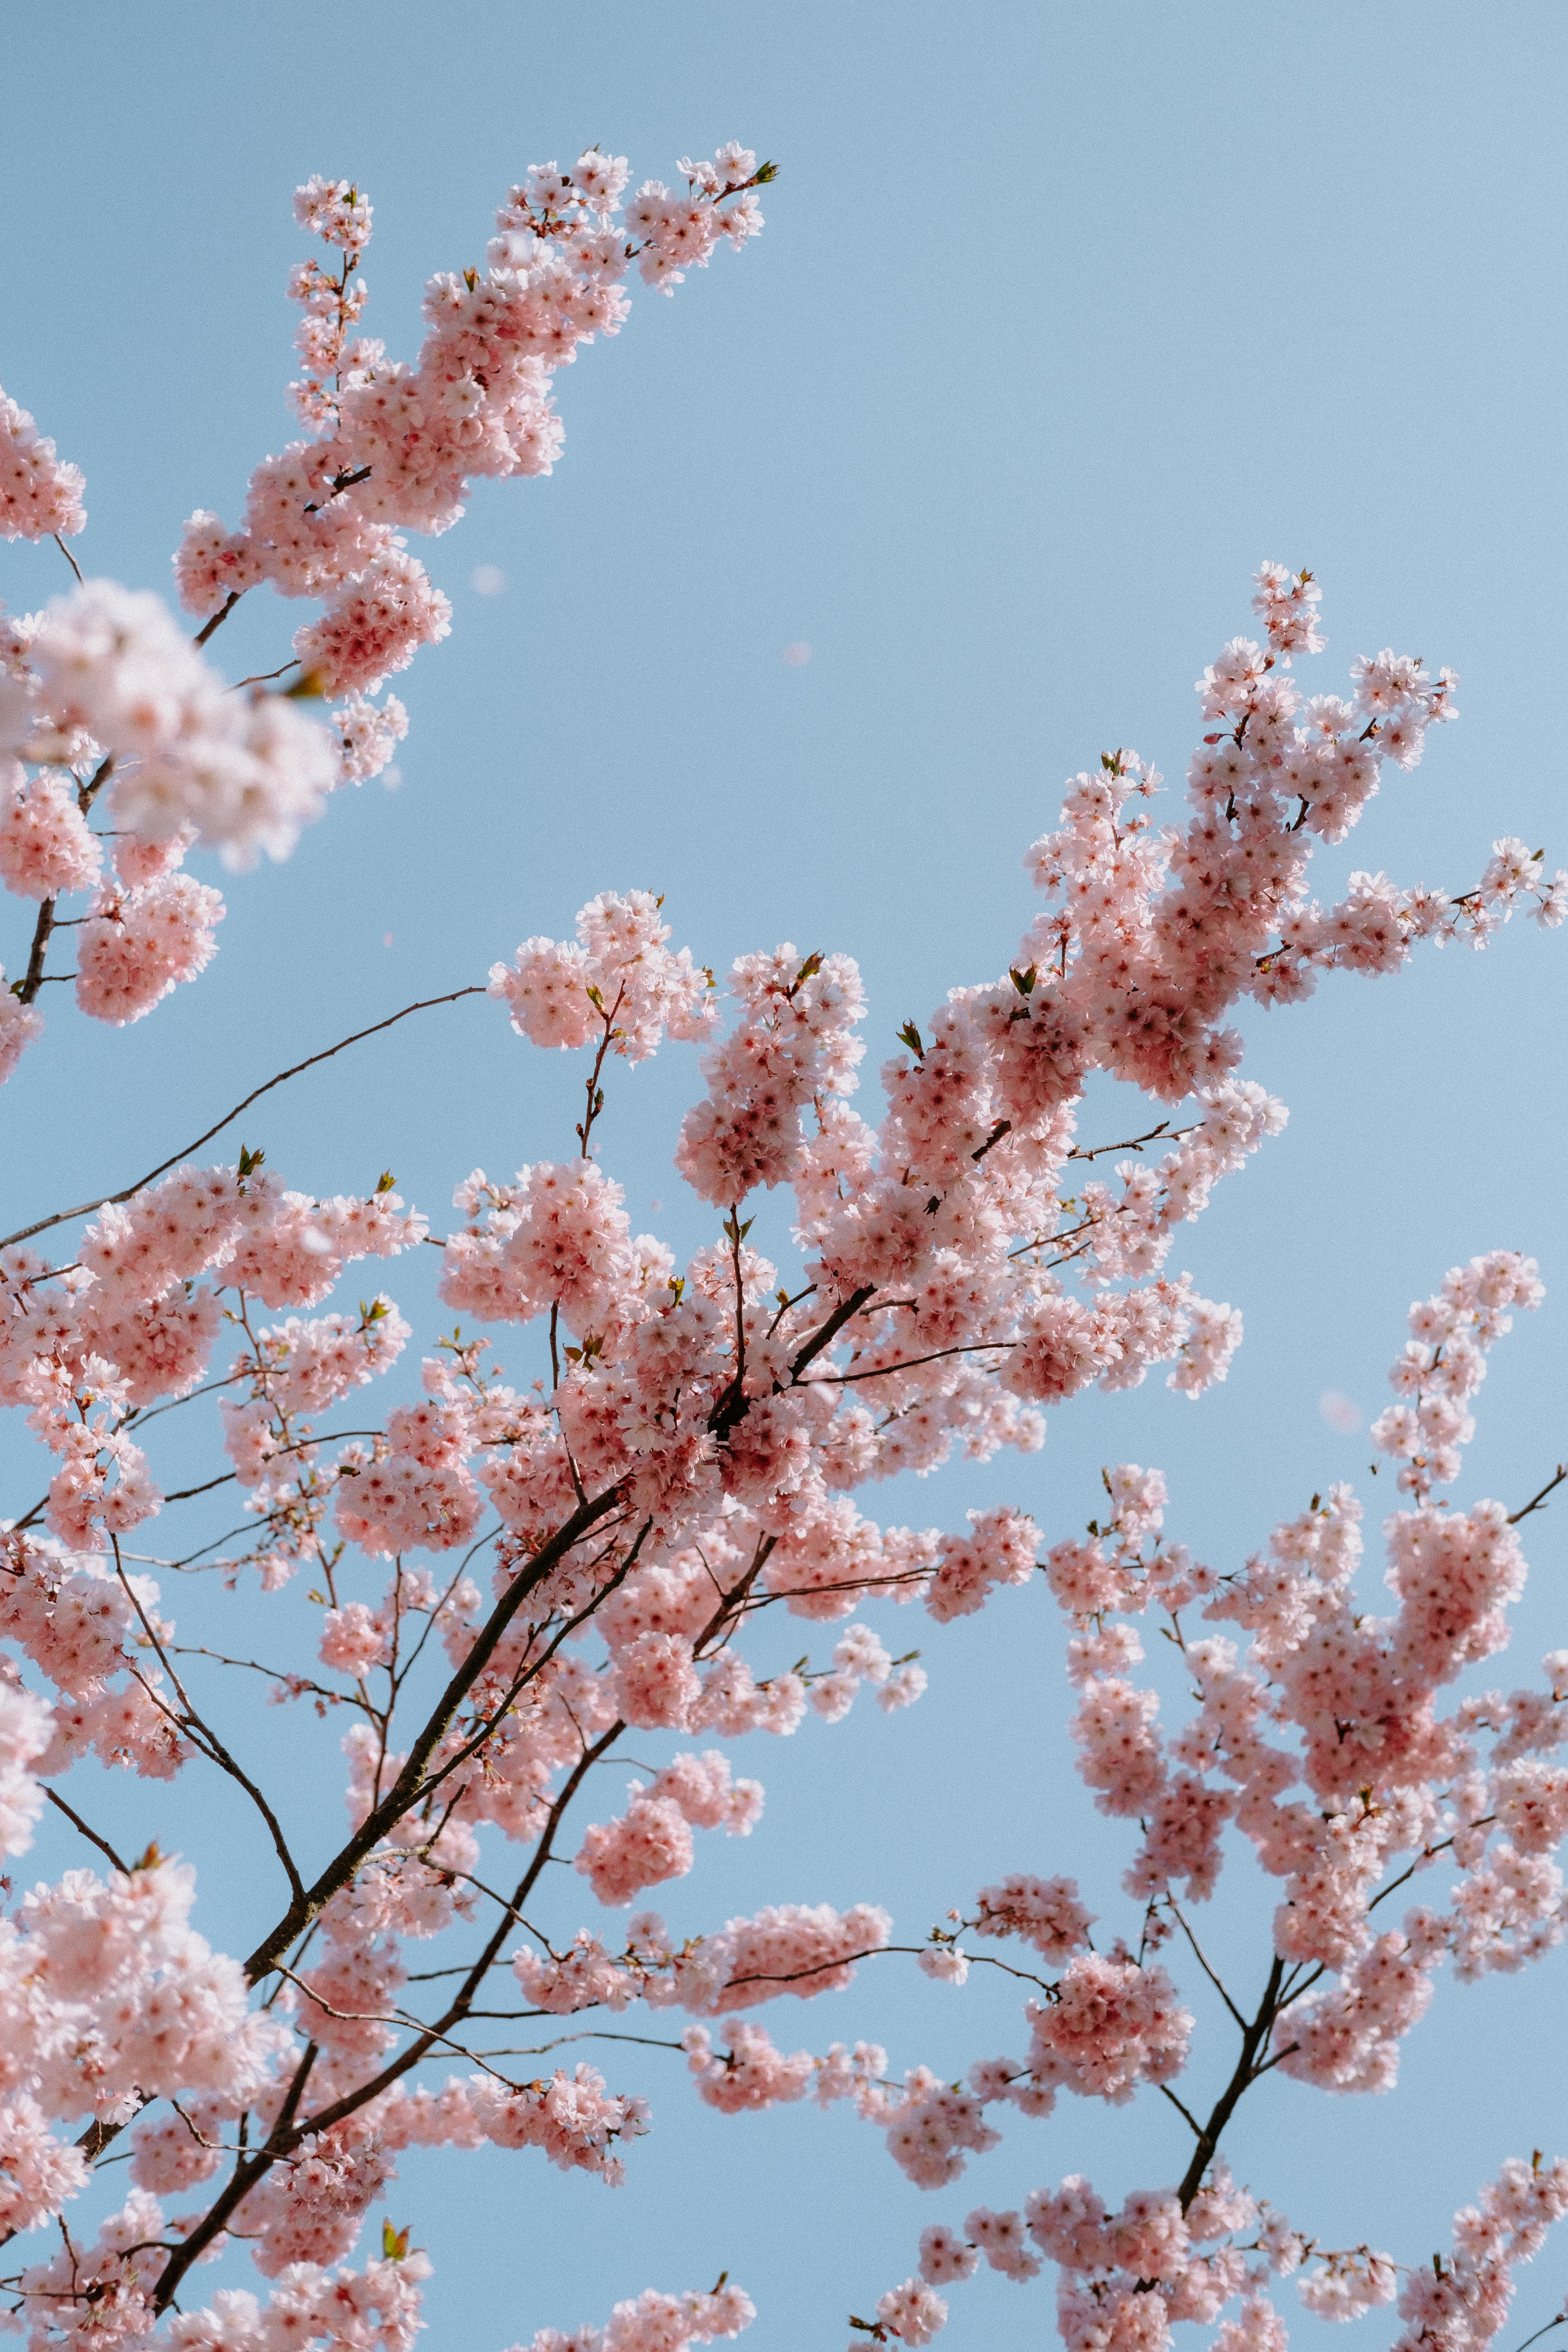 Cherry tree photos download the best free cherry tree stock photos hd images